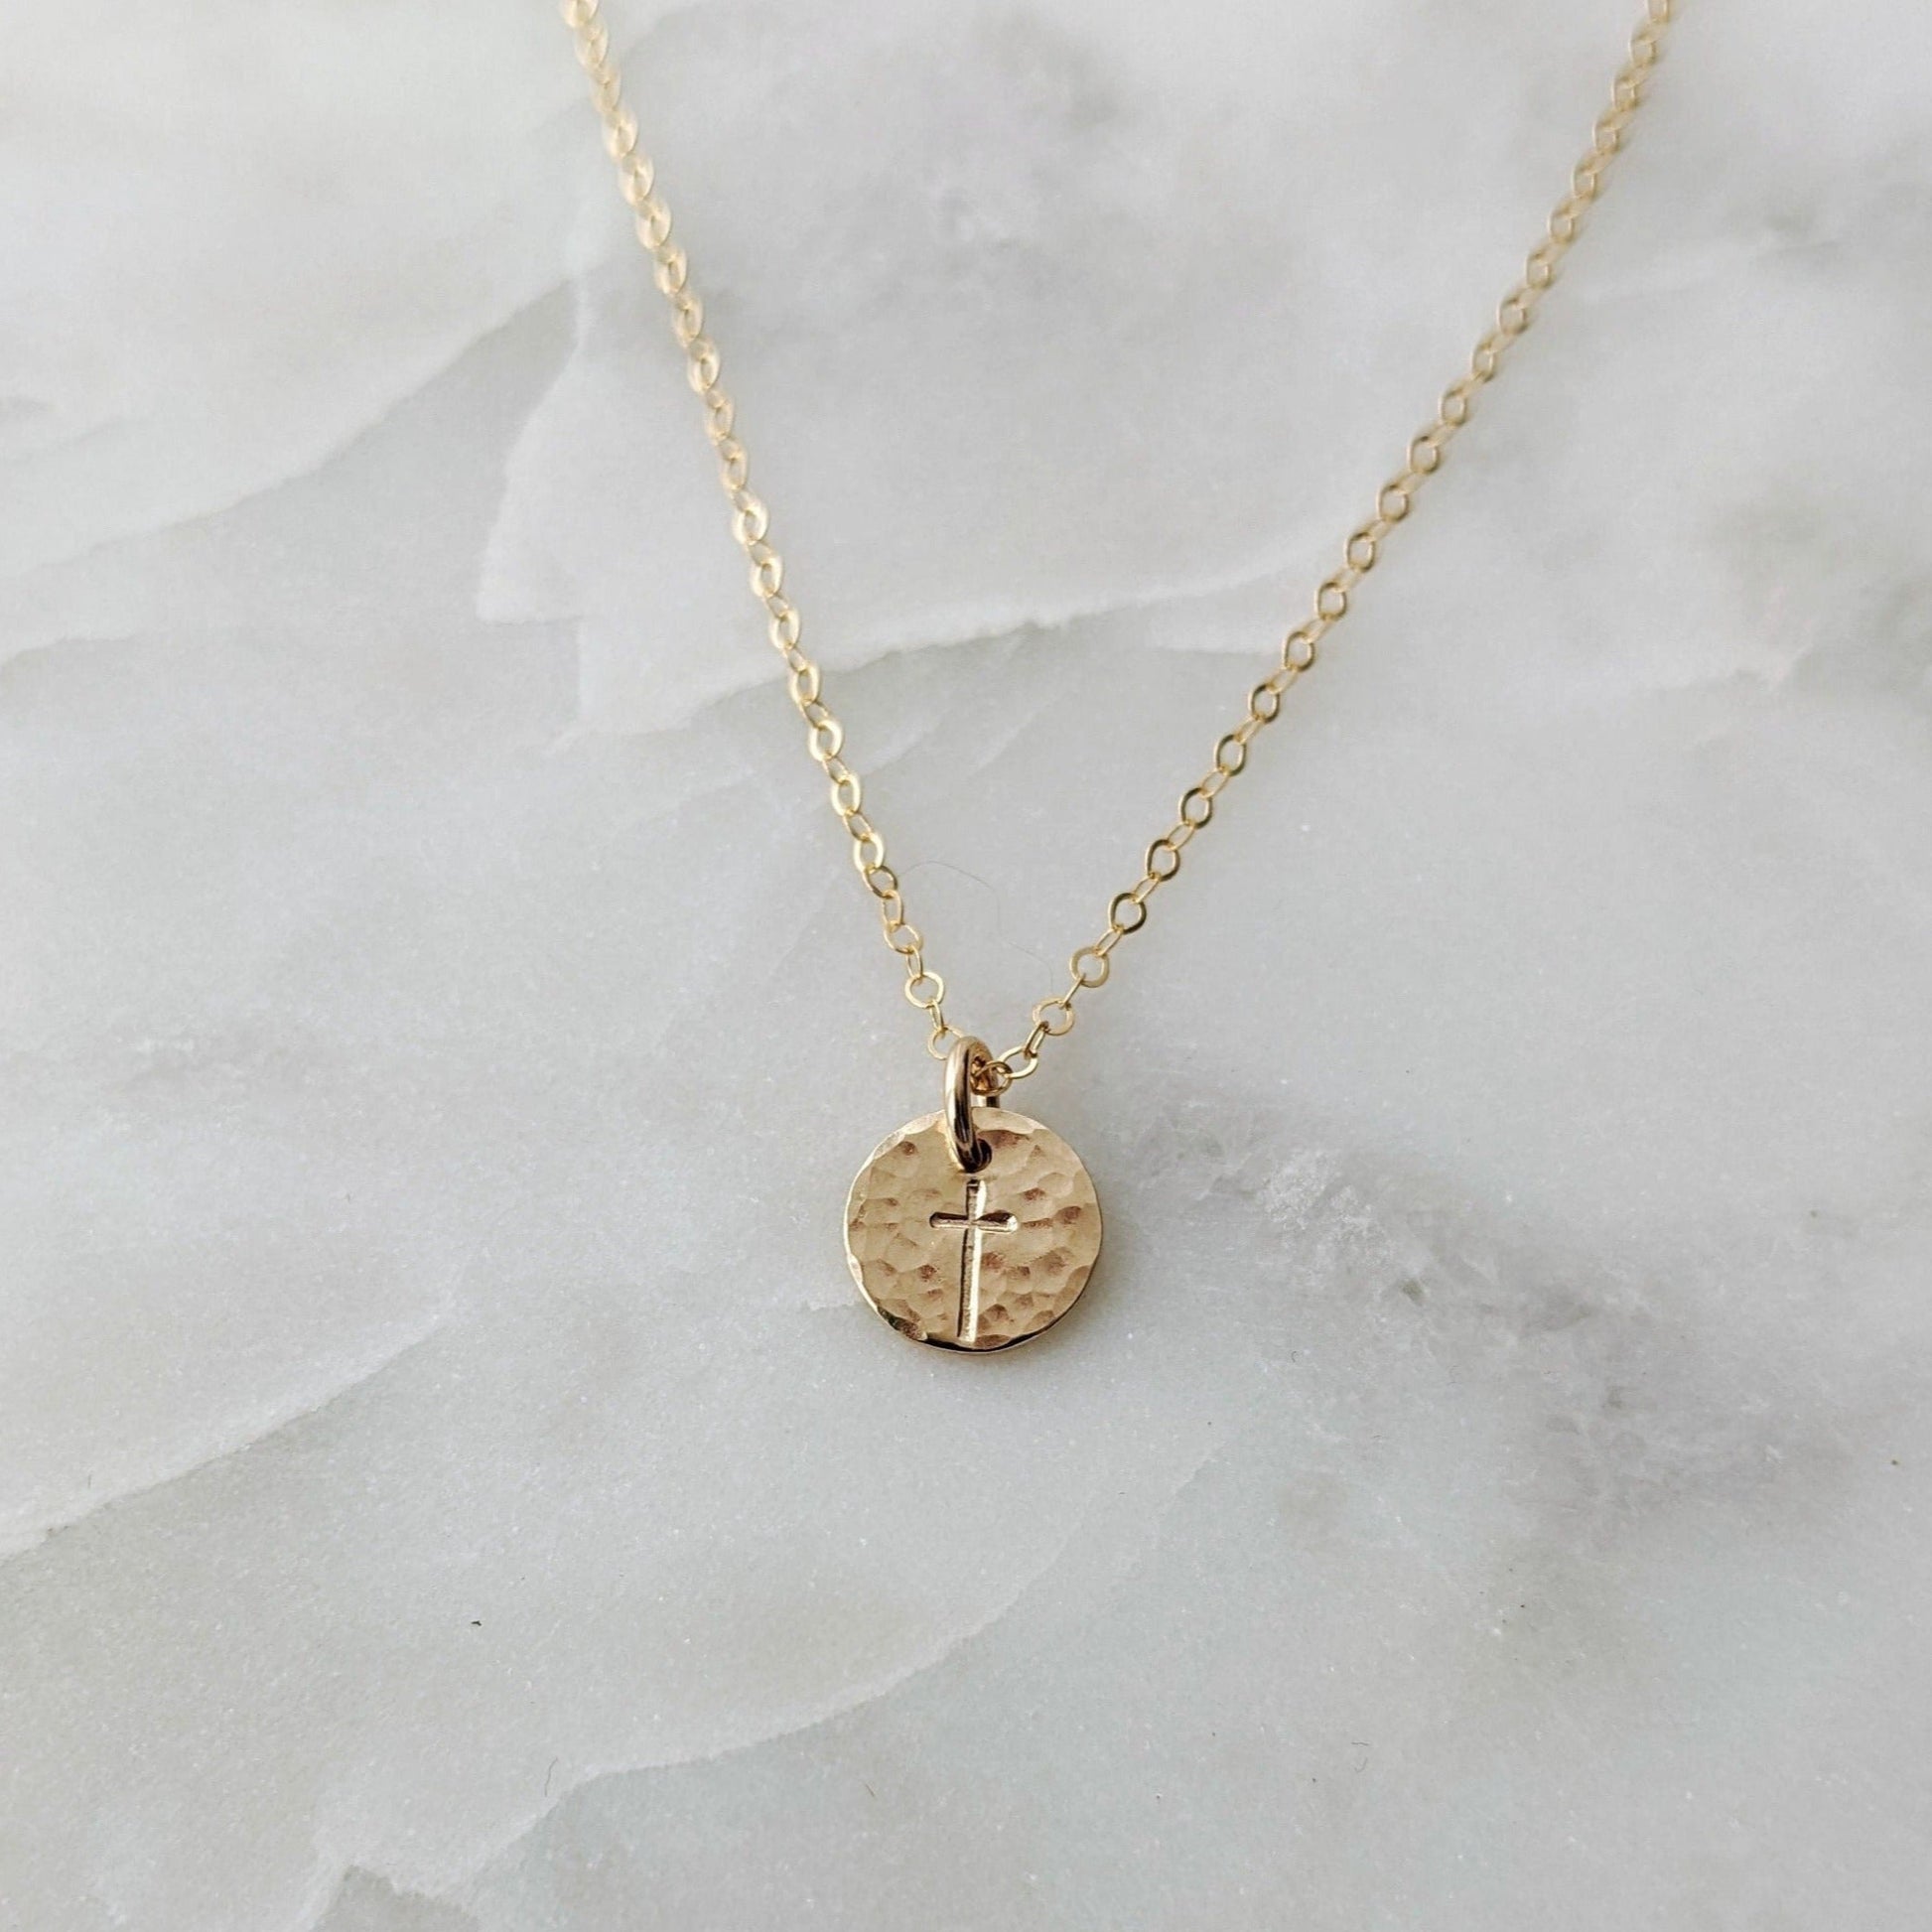 Tiny hammered gold filled disc with cross